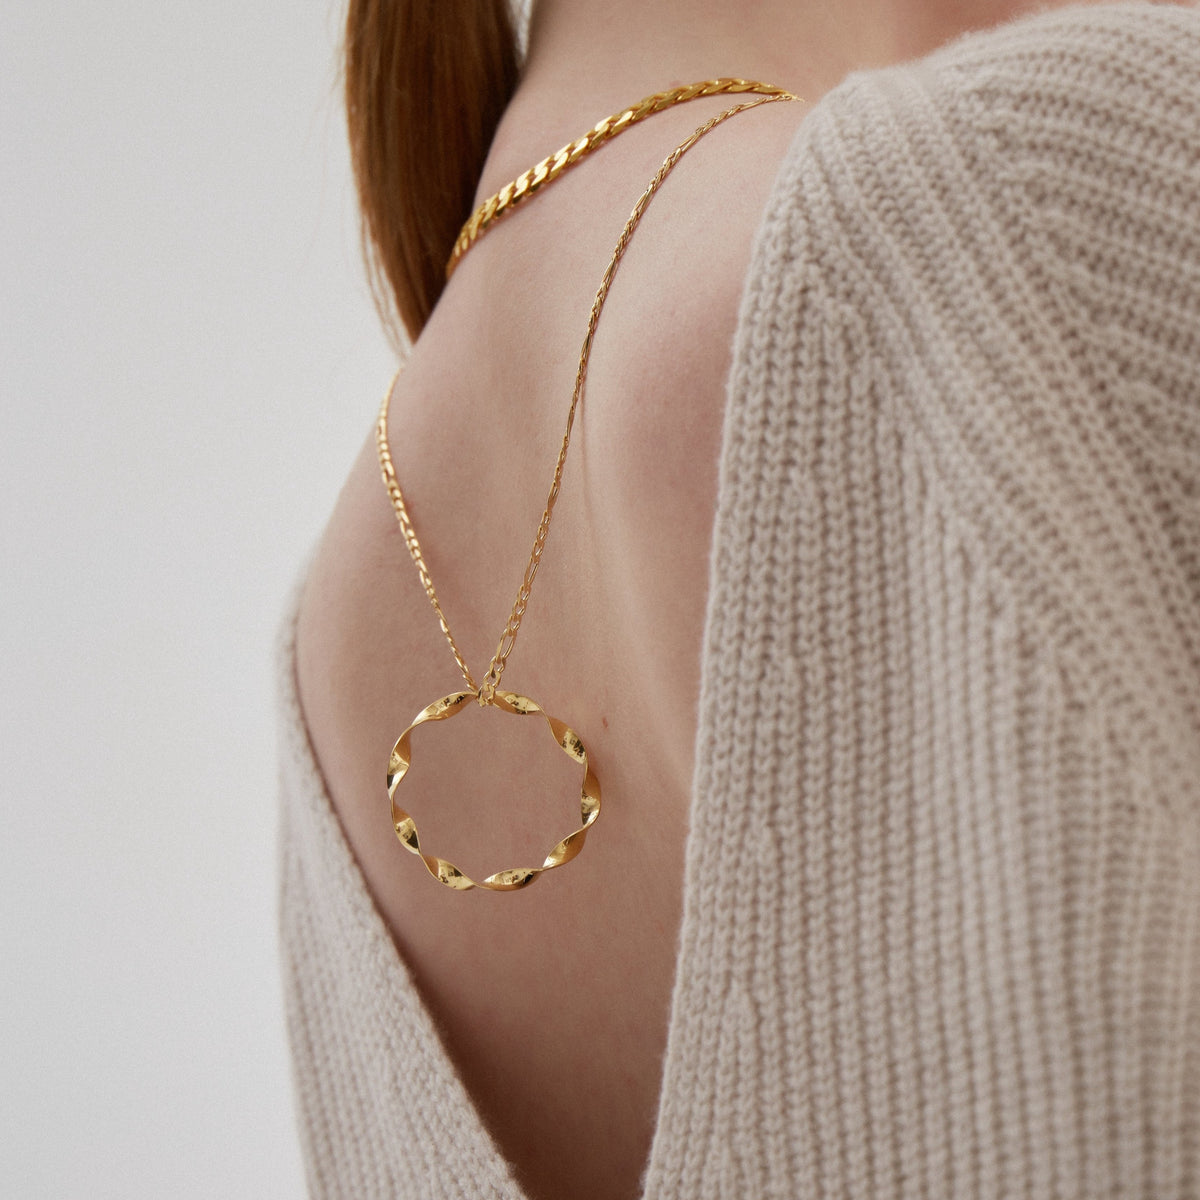 VIKA jewels self love collection wave welle pendant necklace kette Anhänger recycled sterling silver 24 carat gold plated vergoldet handmade bali sustainable ethical nachhaltig schmuck